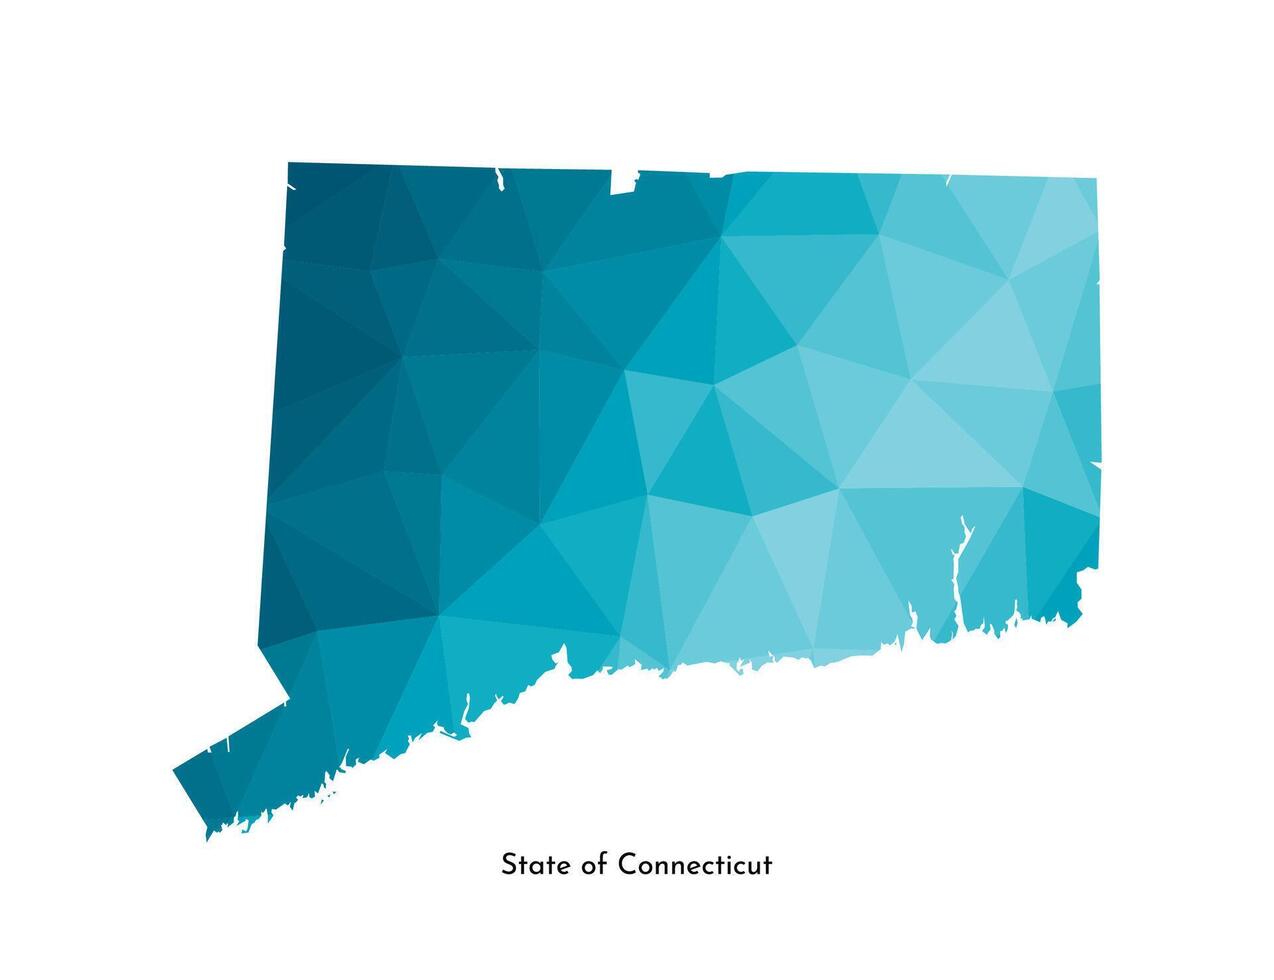 Vector isolated illustration icon with simplified blue map silhouette of State of Connecticut, USA. Polygonal geometric style. White background.